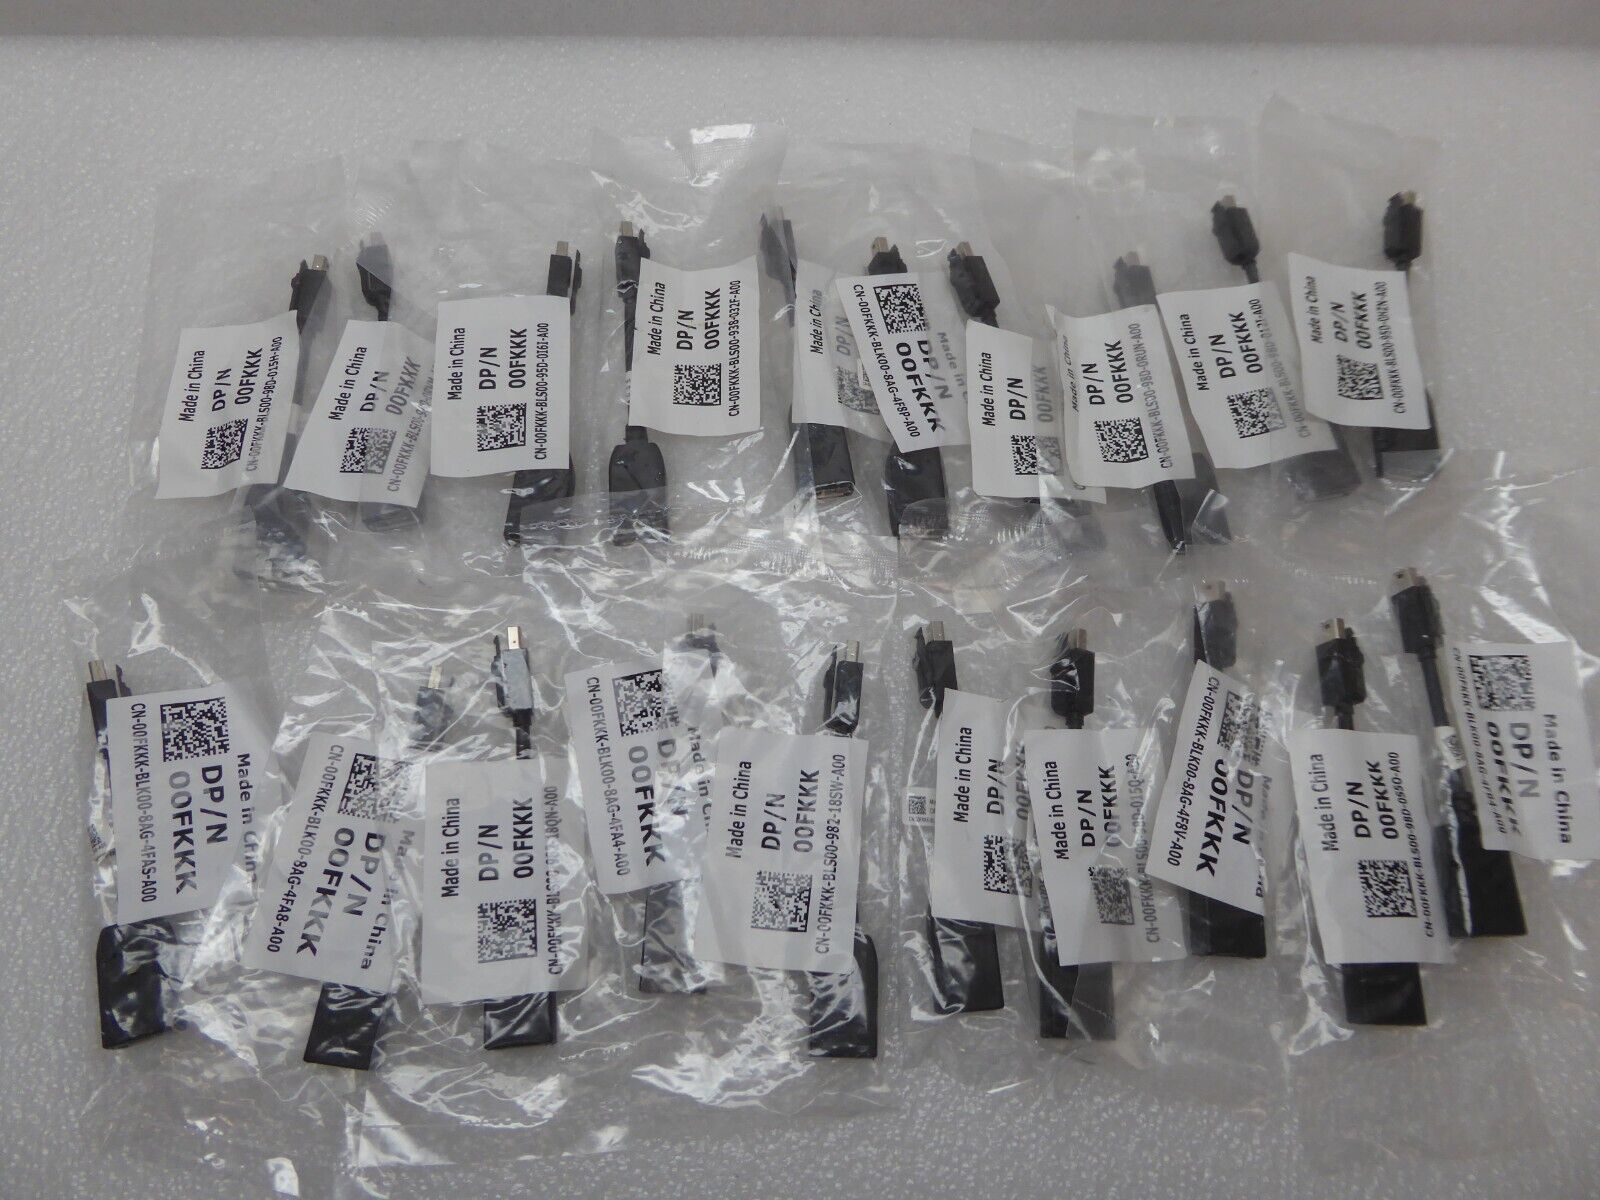 LOT OF 20 Dell 00FKKK Mini Display Port To Display Port Cable Adapters